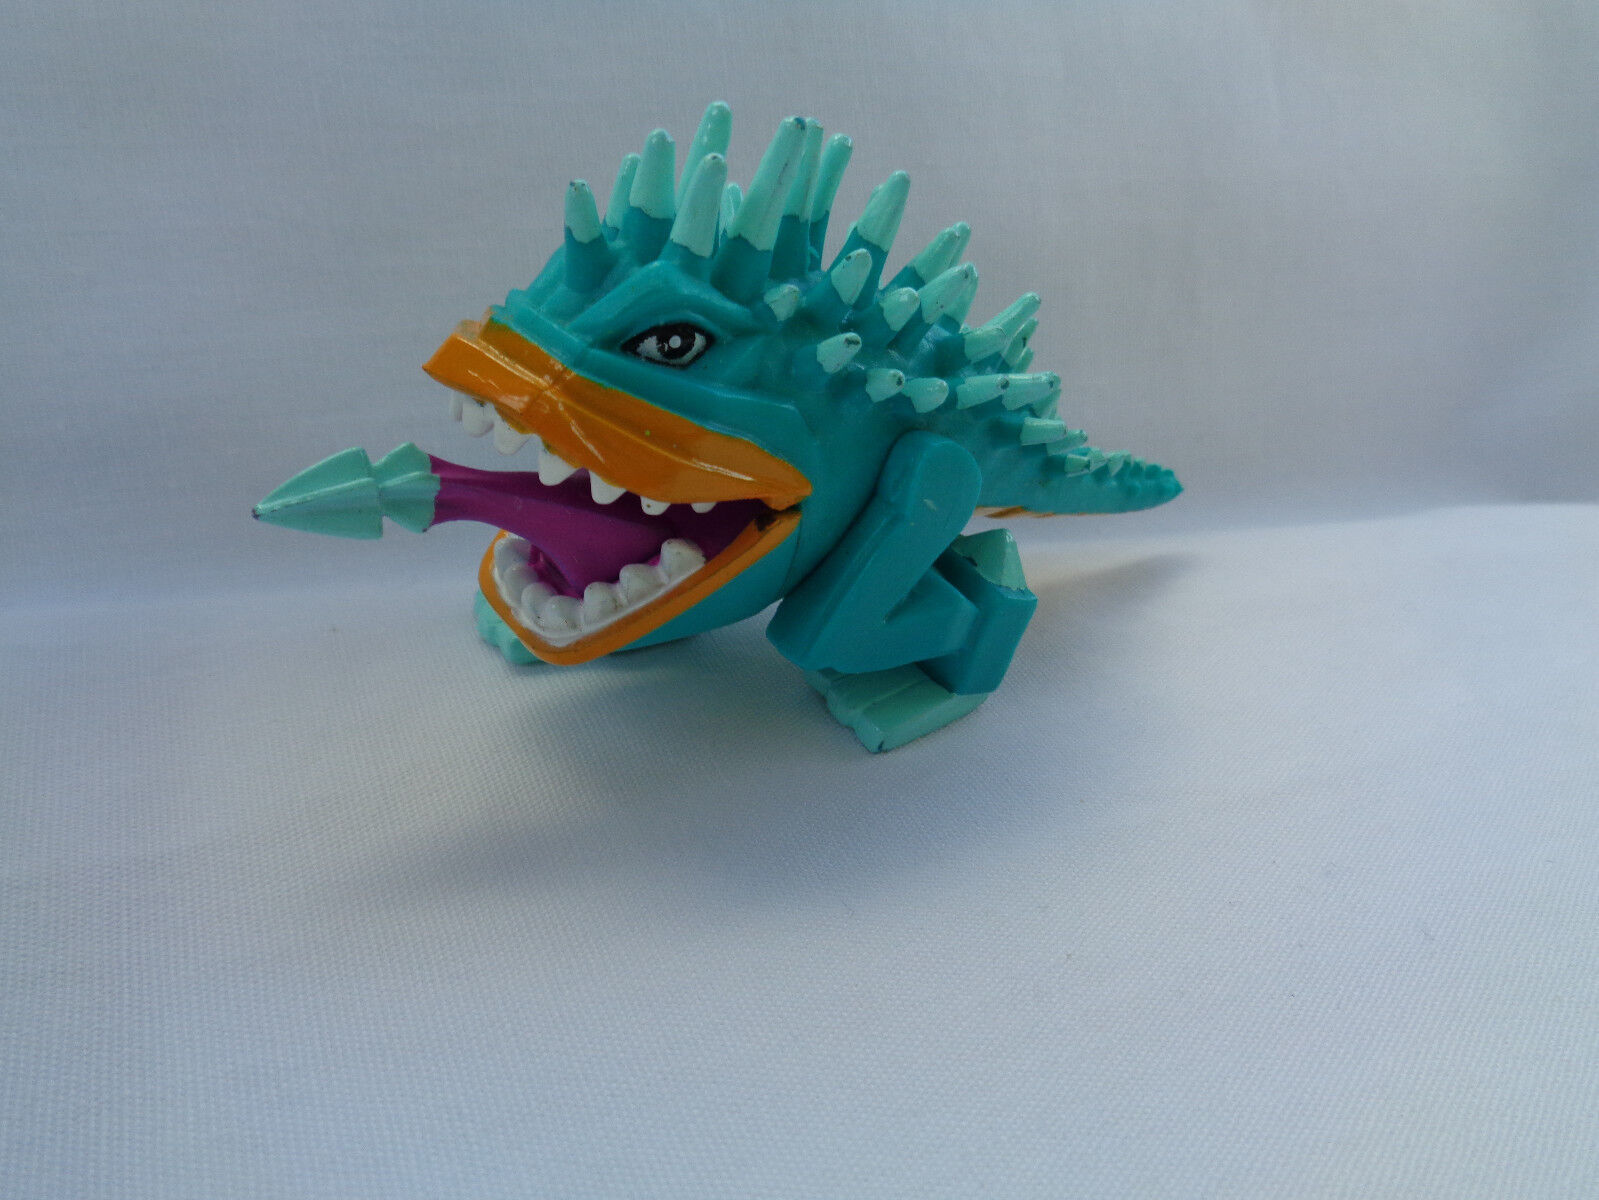 Primary image for Little Tikes Number Busters TM / MGA Aqua Dragon PVC Action Figure #6